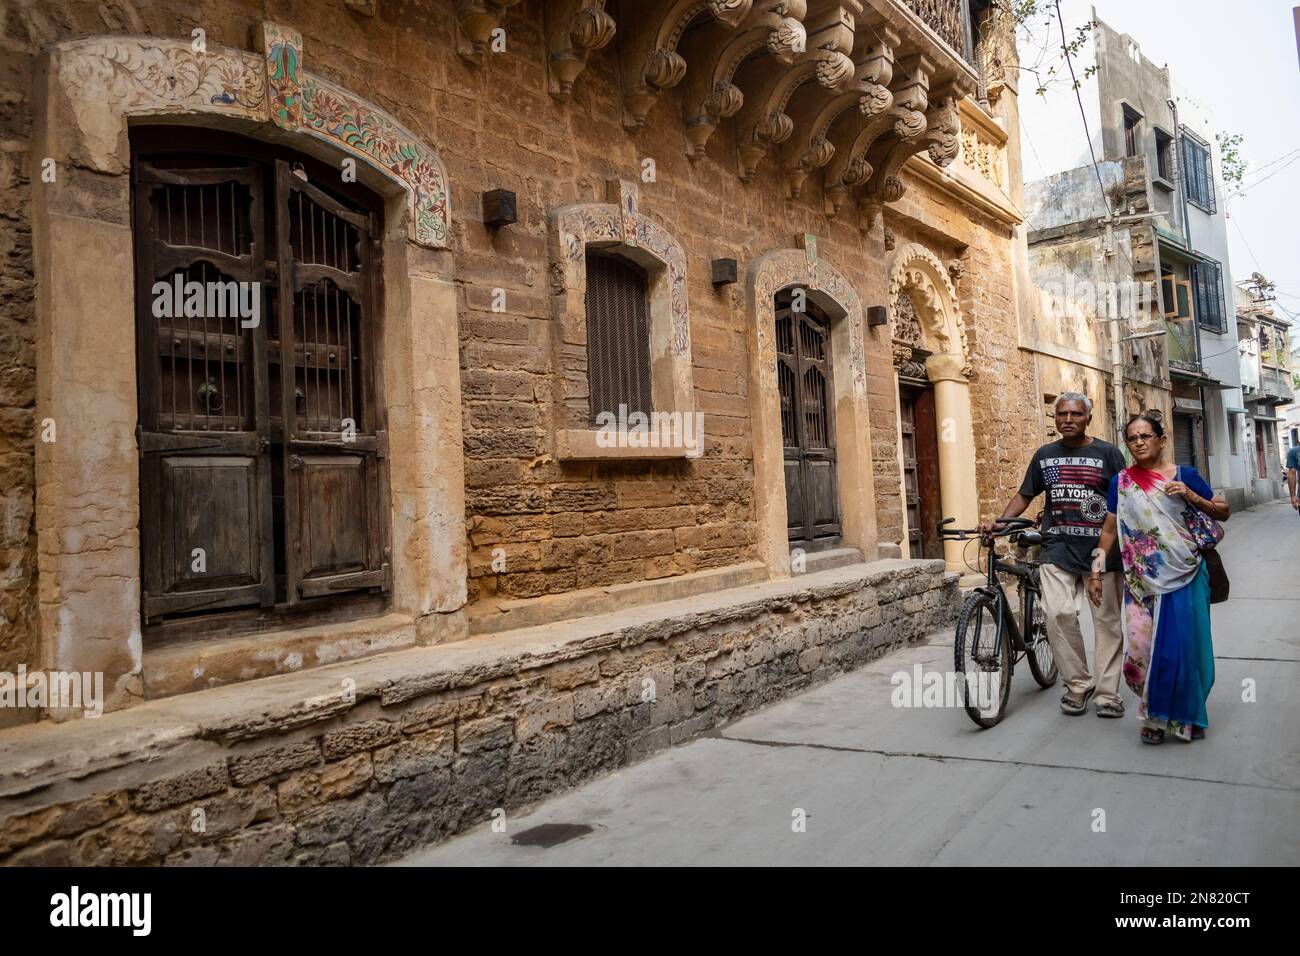 Diu, India - December 2018: An old man and a woman walking with a bicycle in a narrow street lined with old Portuguese era houses in the town of Diu. Stock Photo